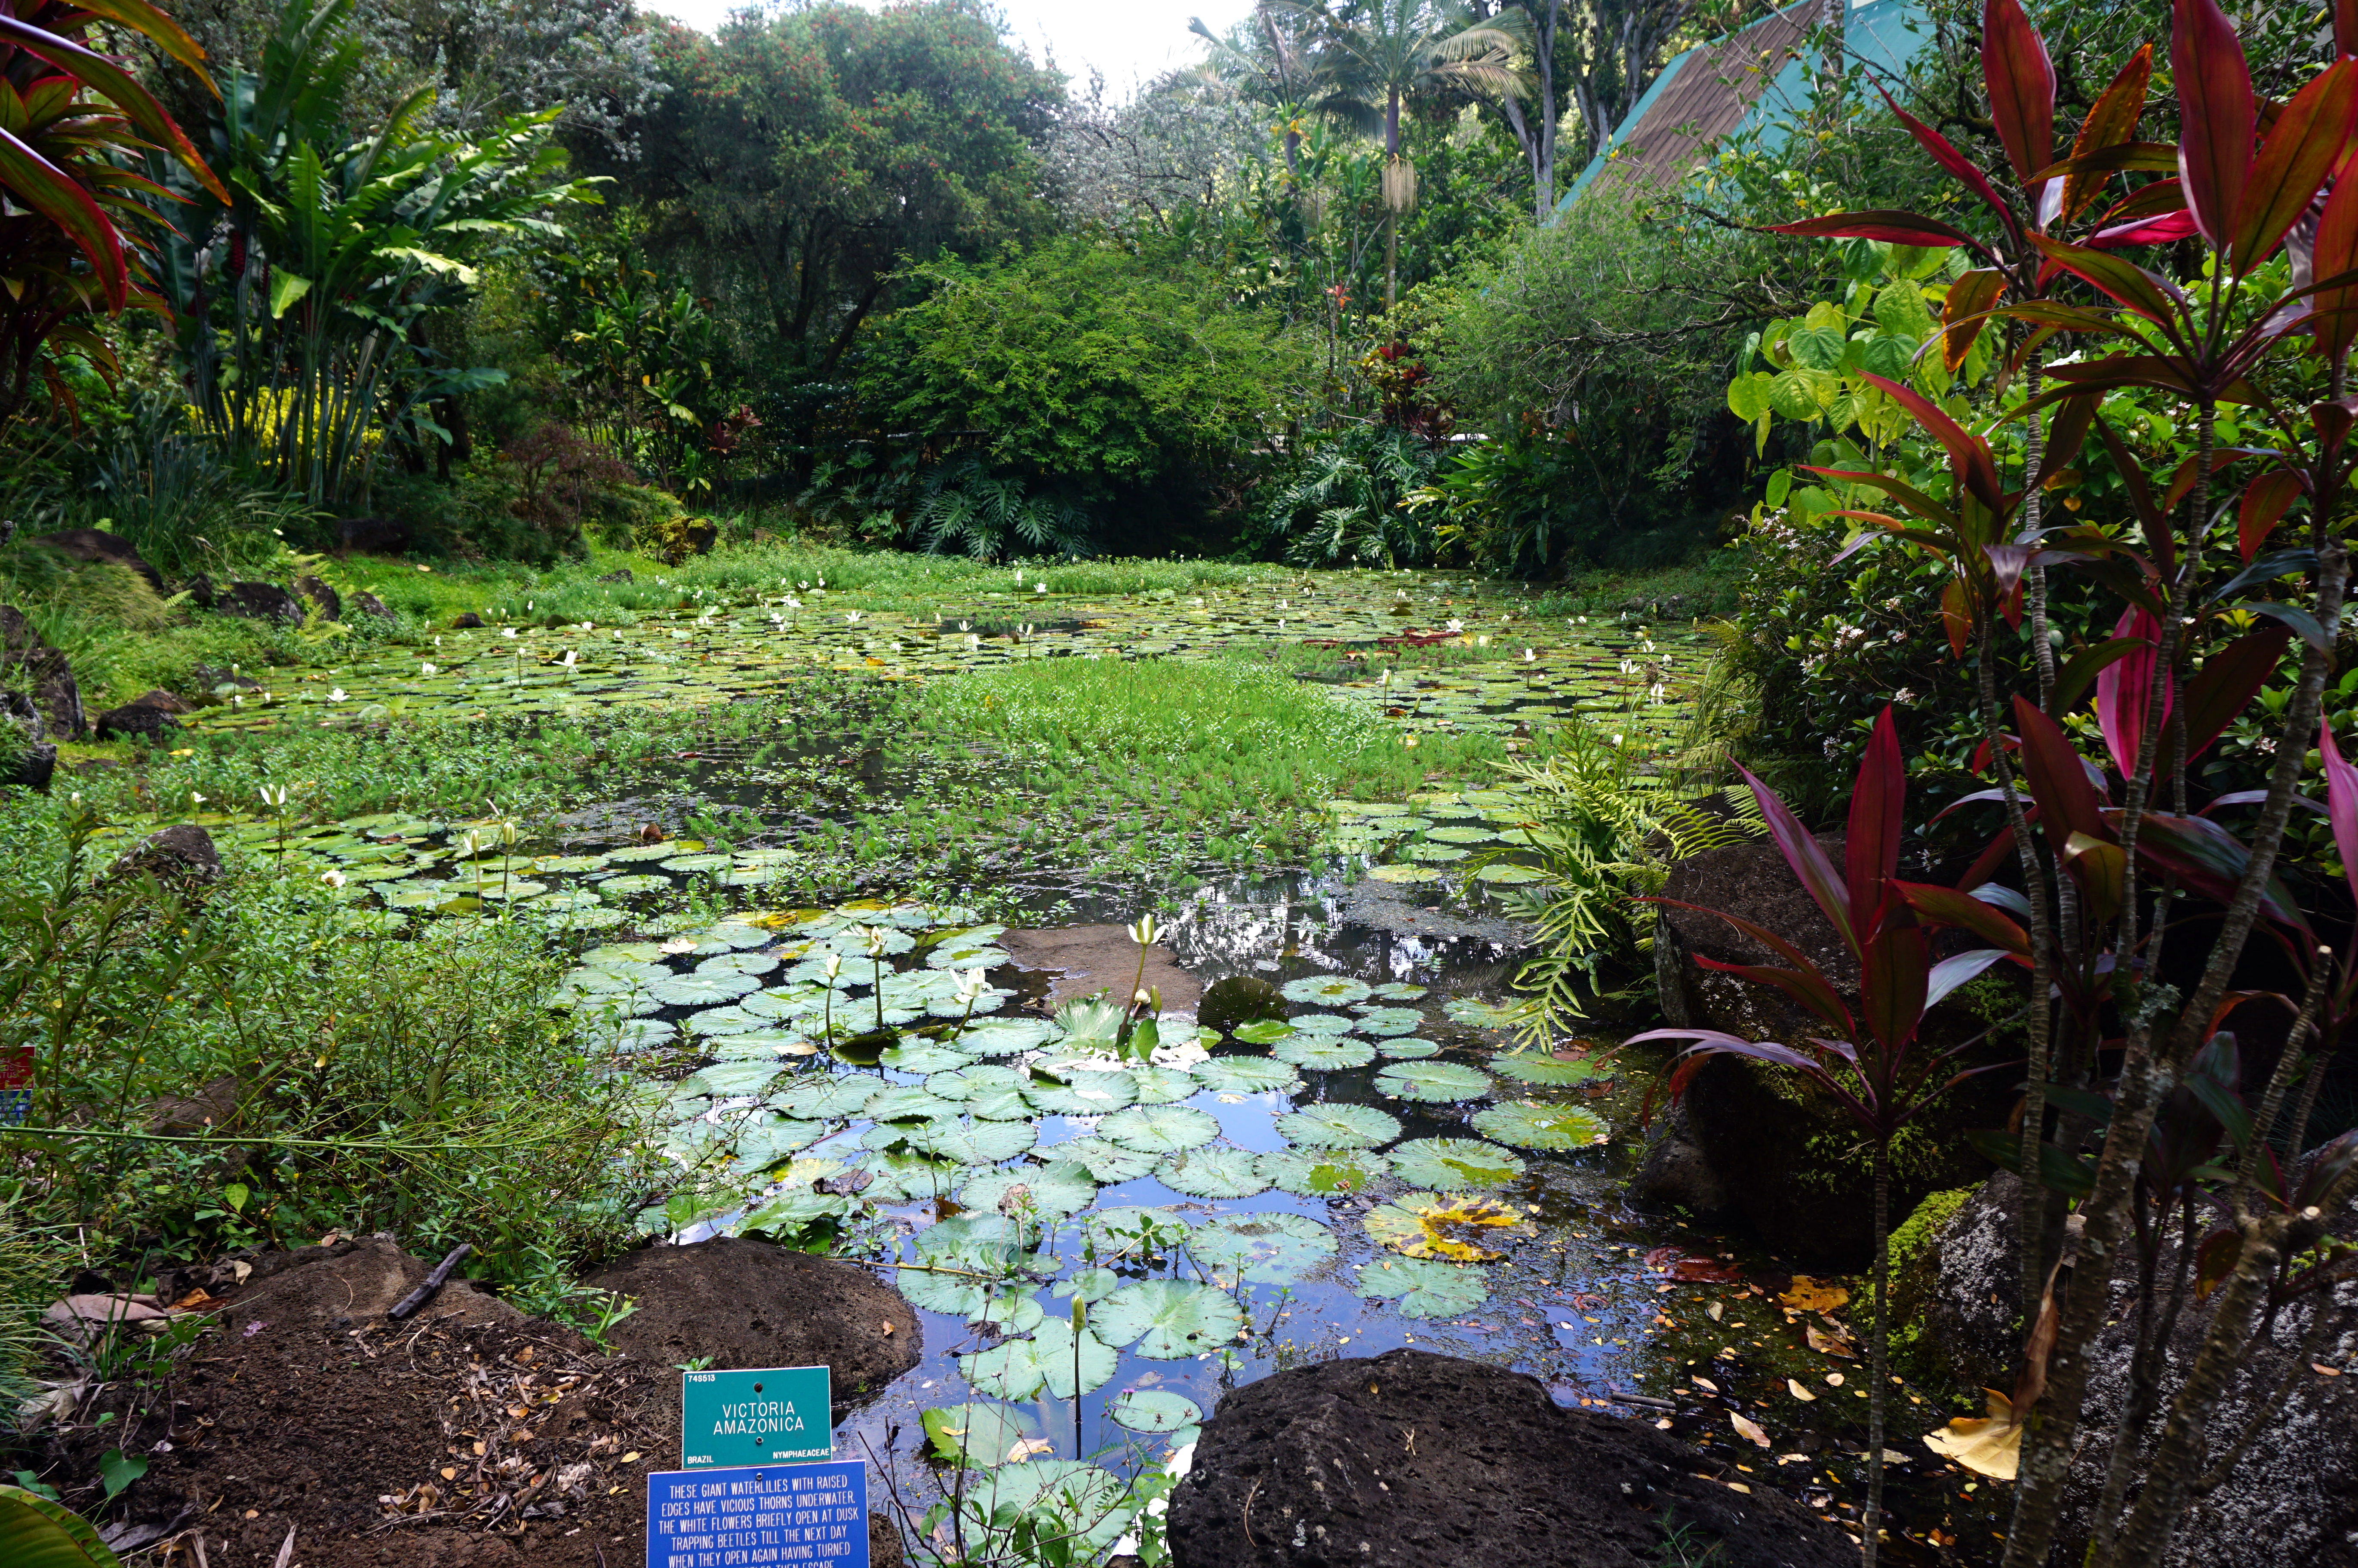 The Waimea Valley Botanical Garden And Hike From California To